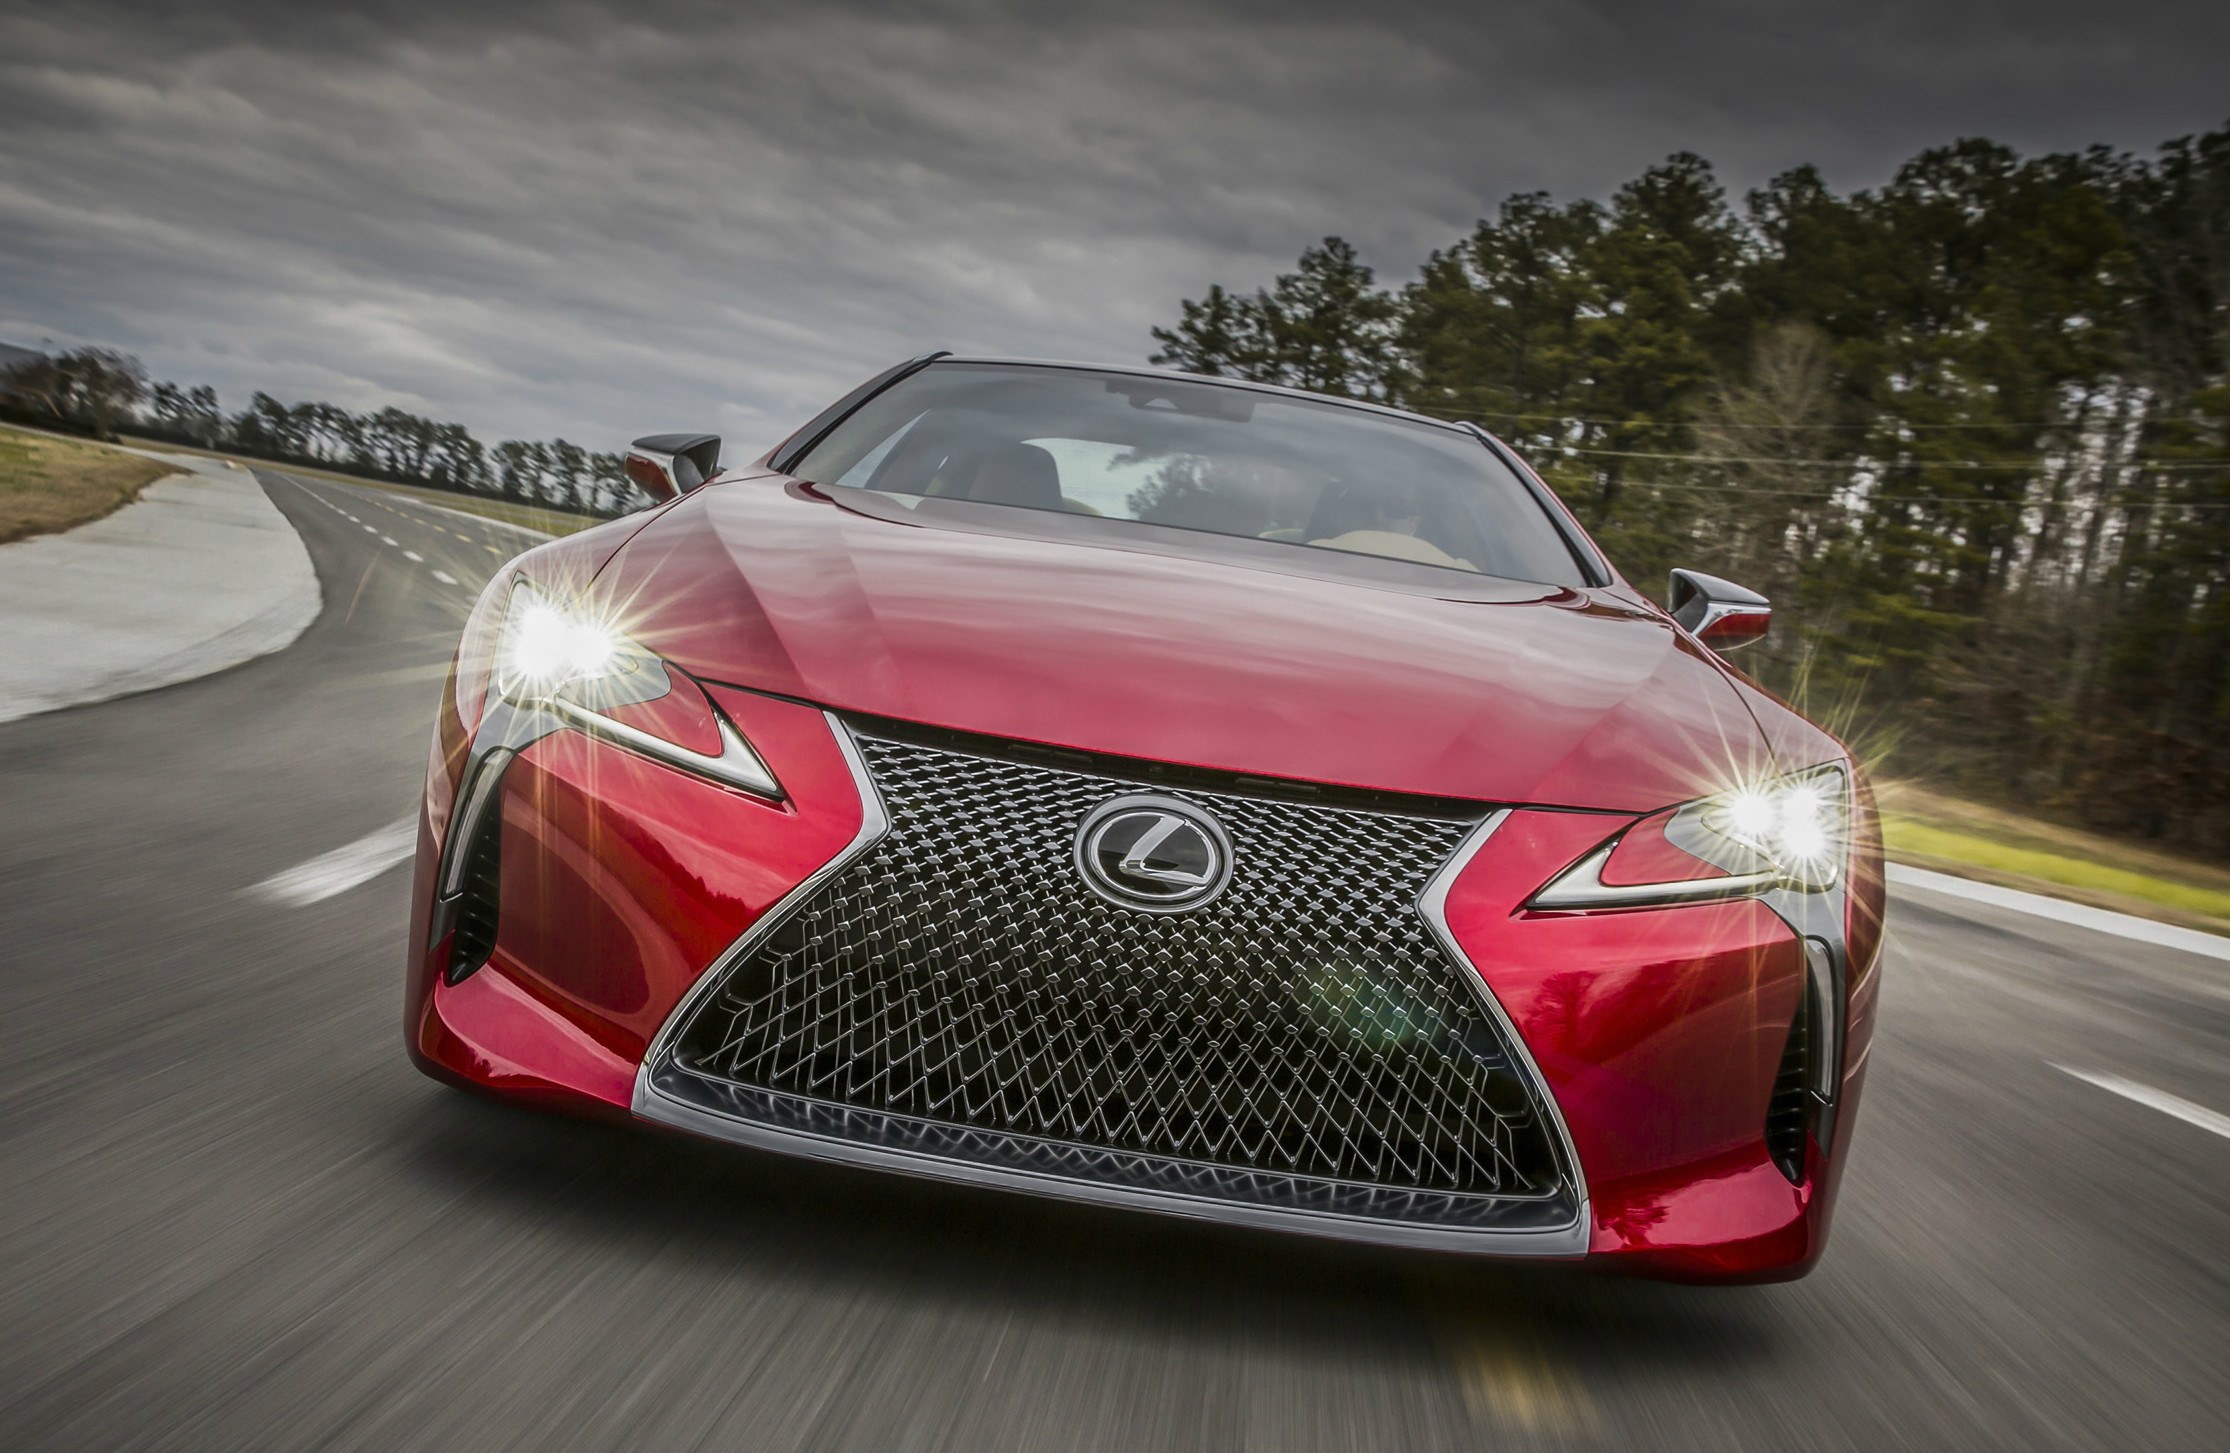 Lexus LC 500 is a £90,000 sports car that goes on sale in Britain in 2017